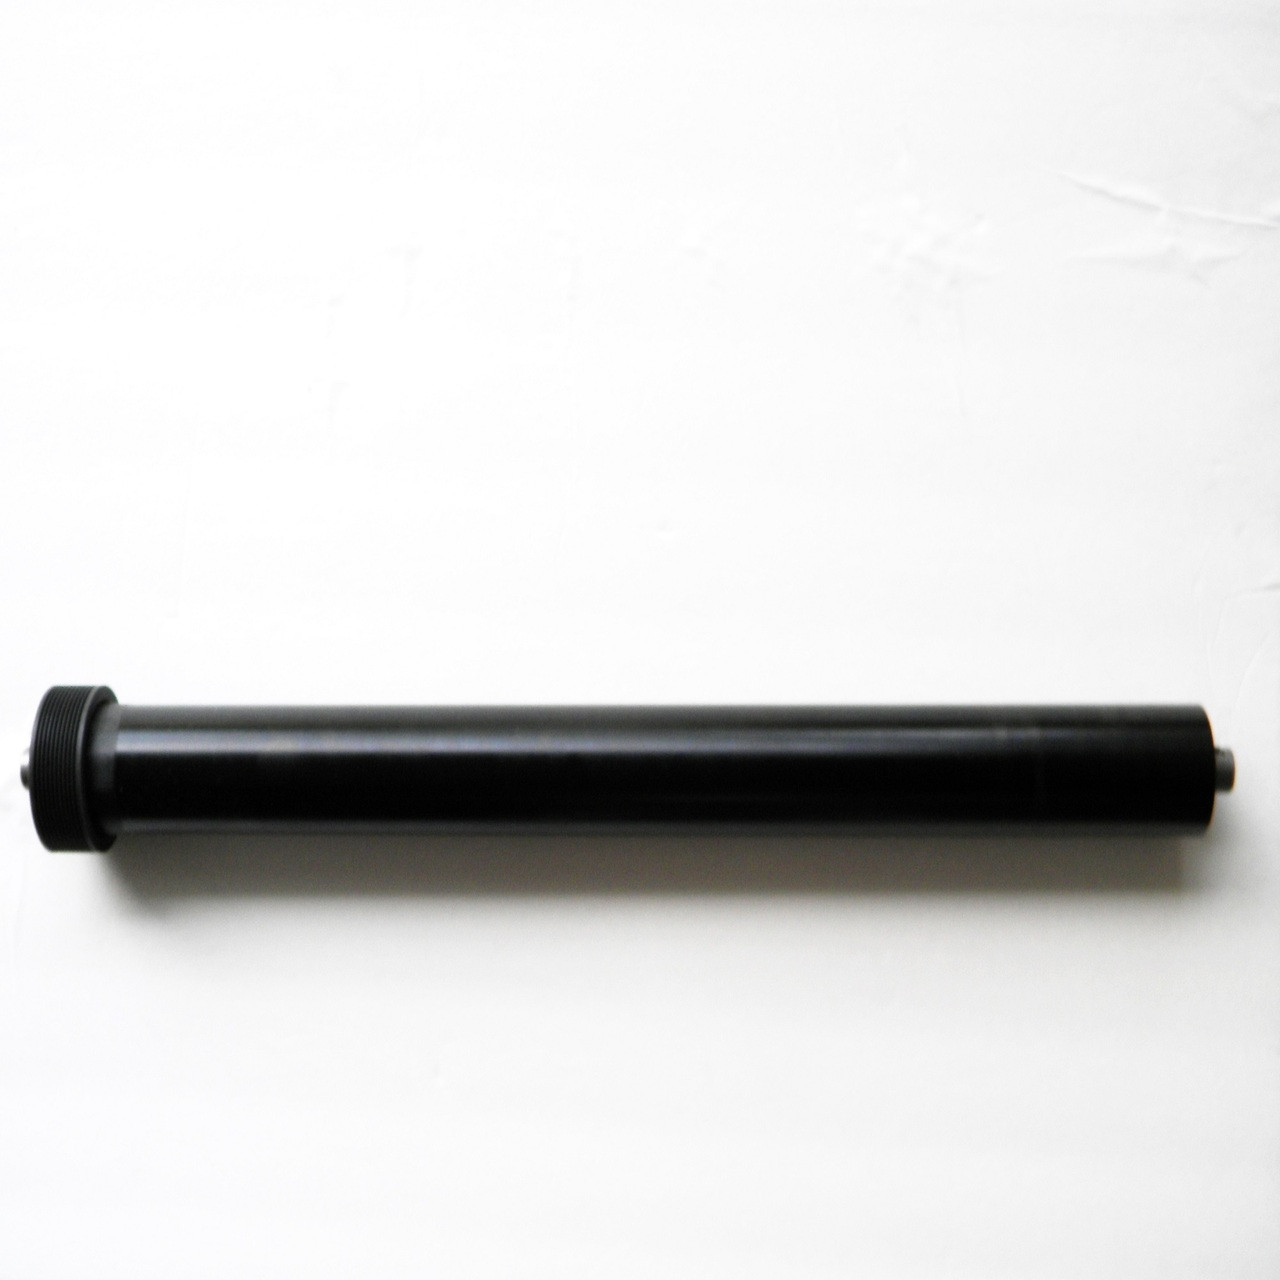 Treadmill Front Roller Part Number 293637